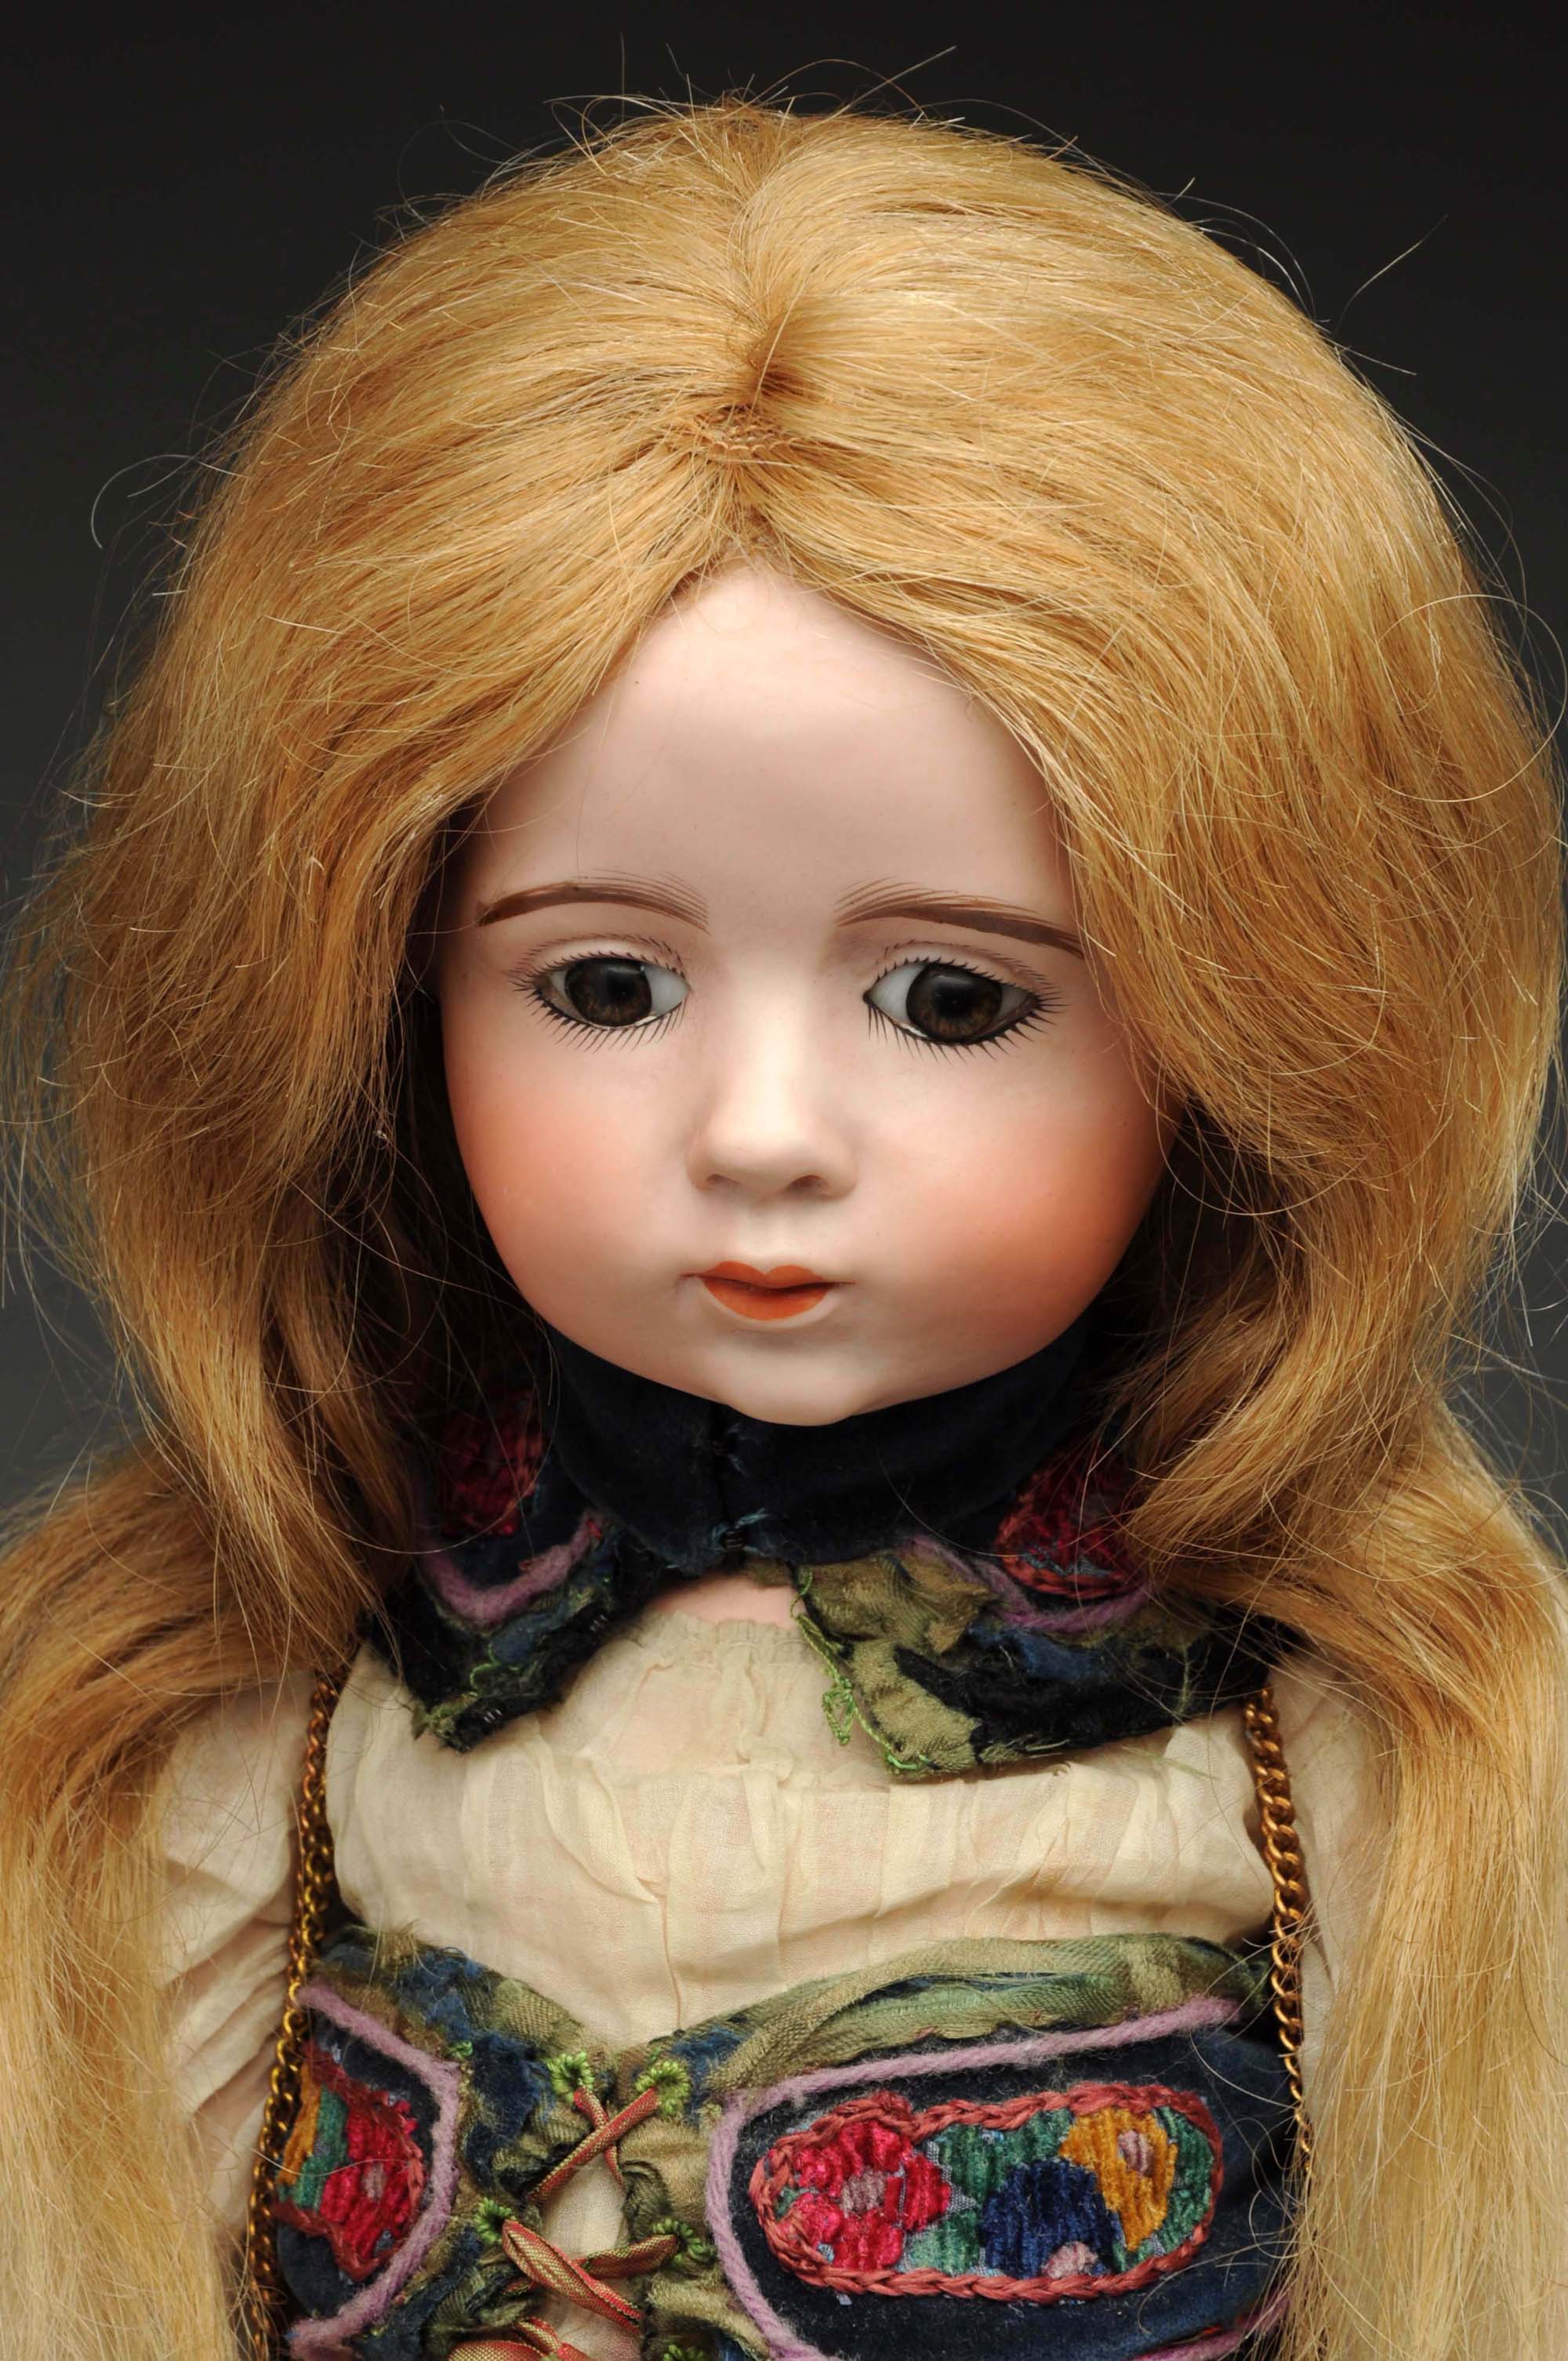 22-inch A. Marque bisque-head girl doll, circa 1914, French, all original, est. $100,000-$200,000. Morphy Auctions image